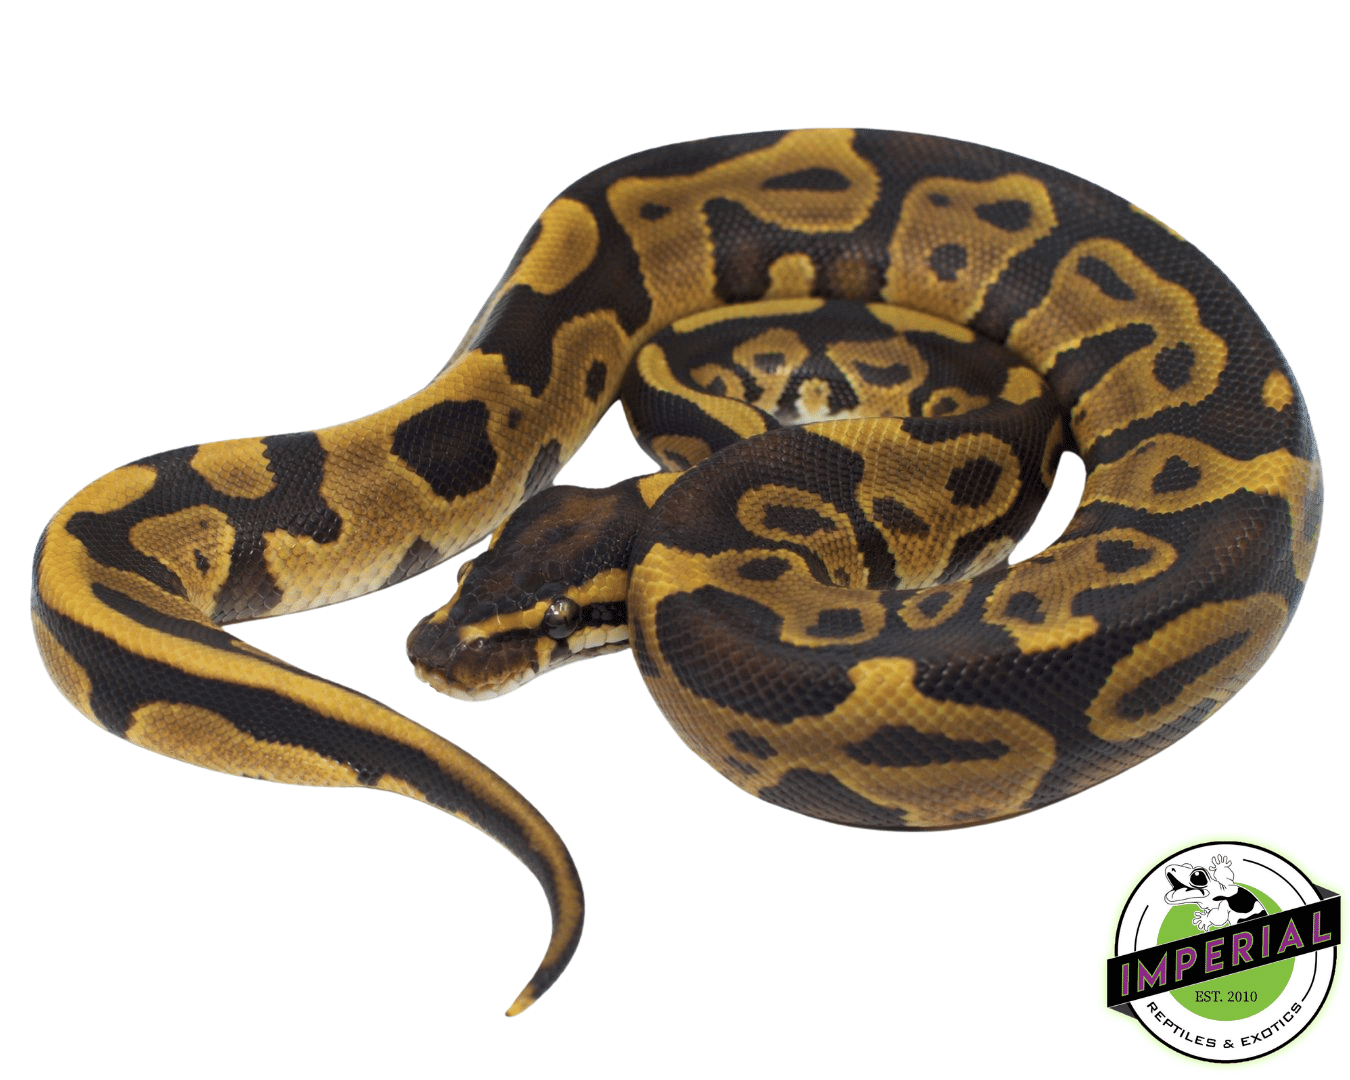 leopard ball python for sale online, buy leopard ball pythons near me at cheap prices